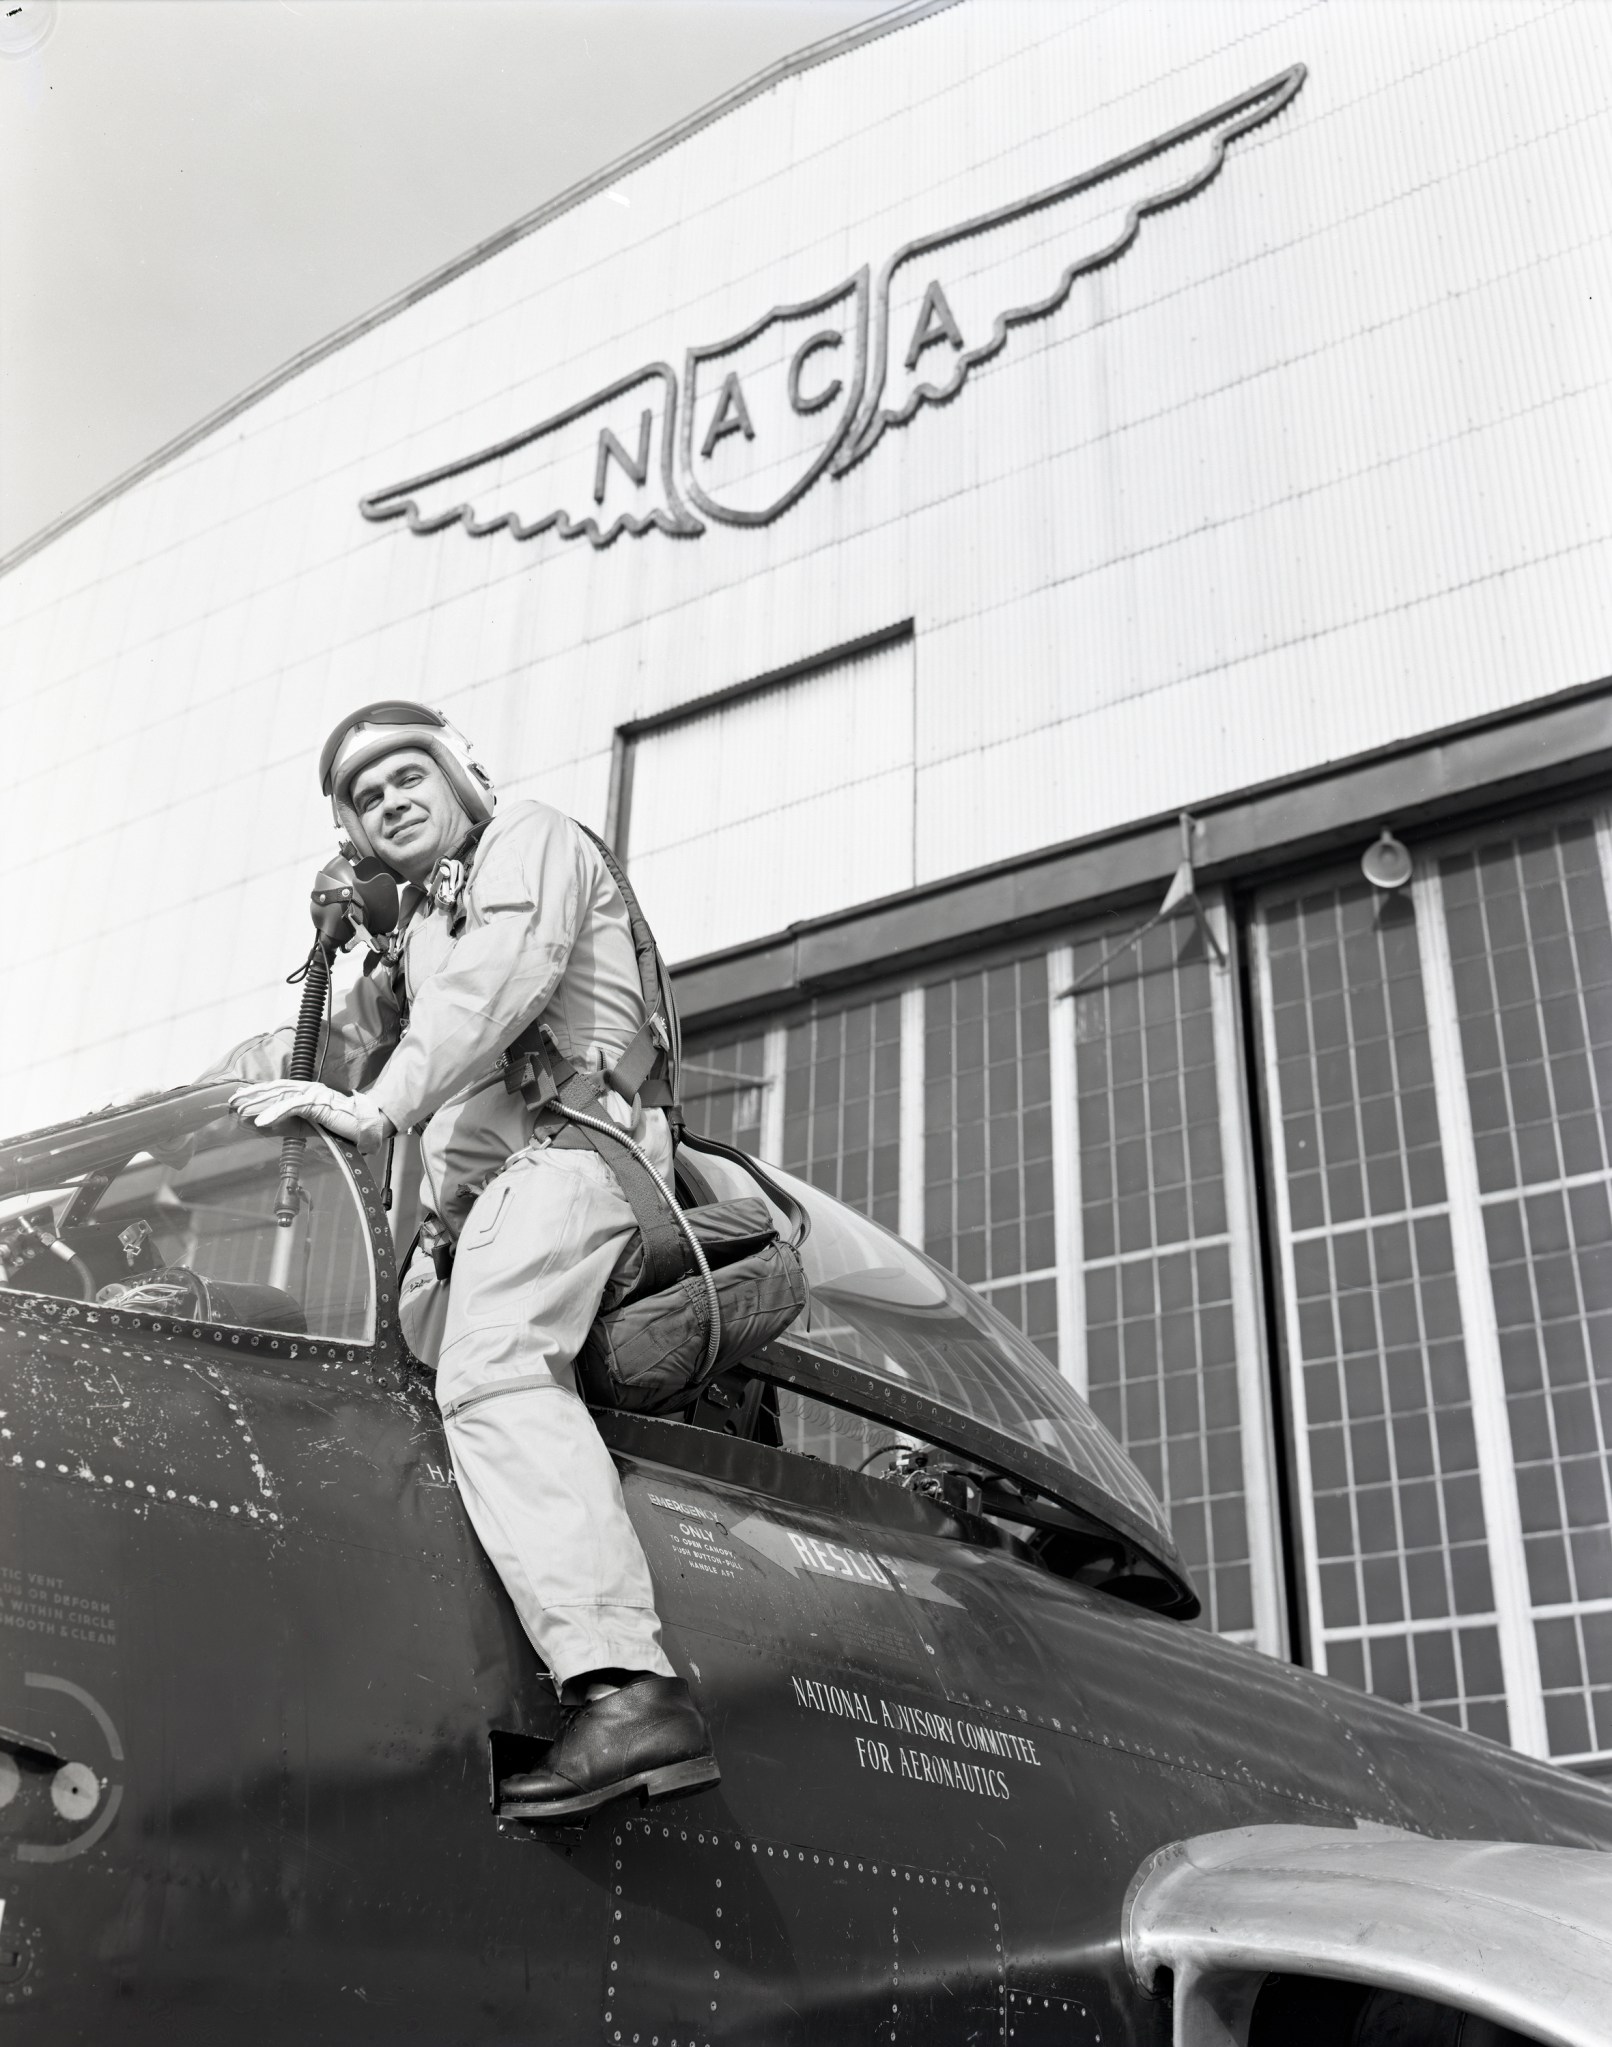 A black-and-white photo of a pilot posing as he climbs into a plane’s cockpit. Behind him in the background is a hangar with a large sign hung on it that has the letters “N-A-C-A” and a pair of wings.